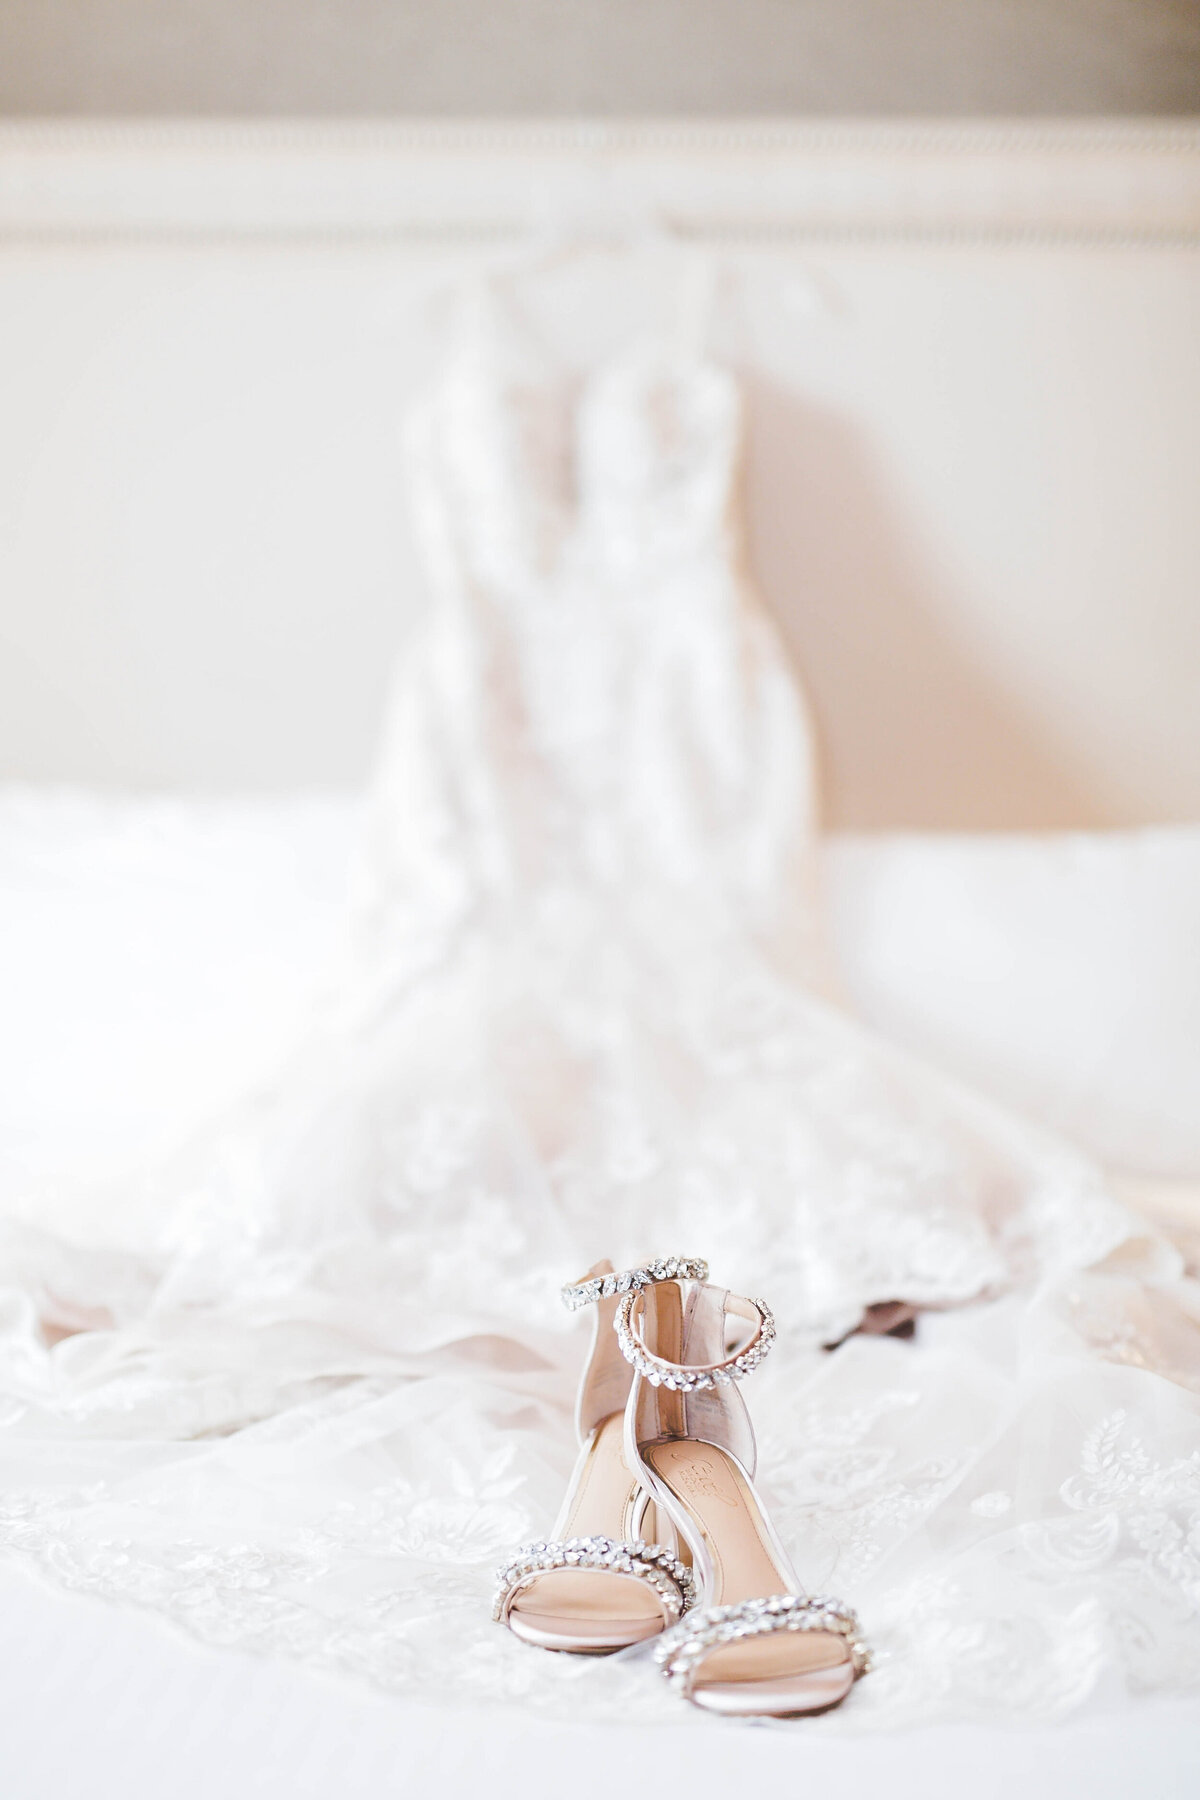 beautiful wedding dress and wedding shoes laid out on a bed